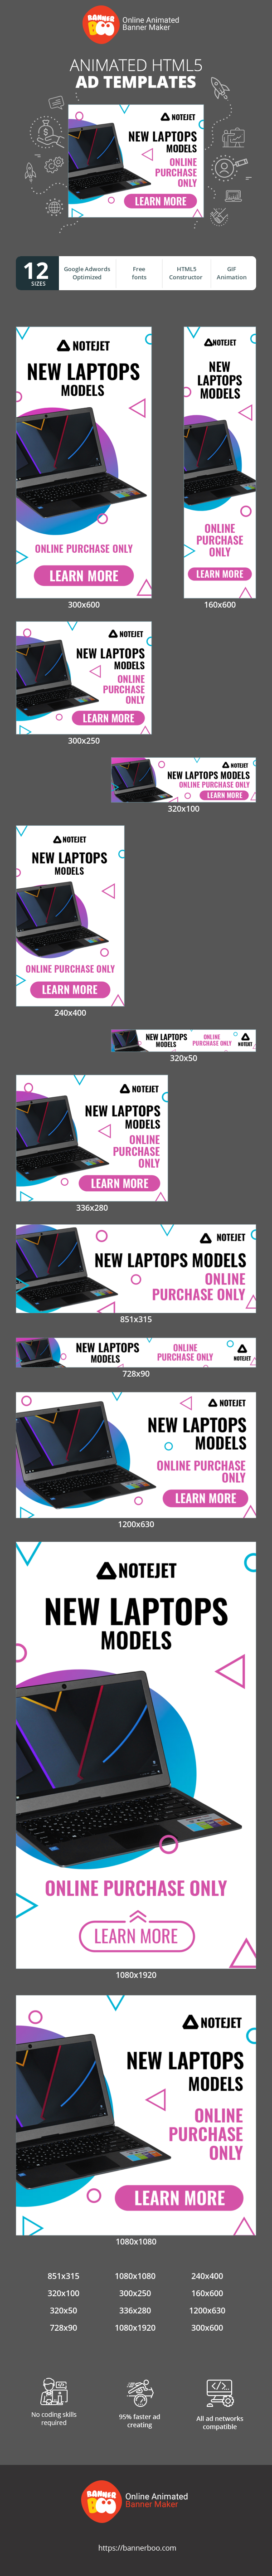 Banner ad template — New Laptops Models — Online Purchase Only